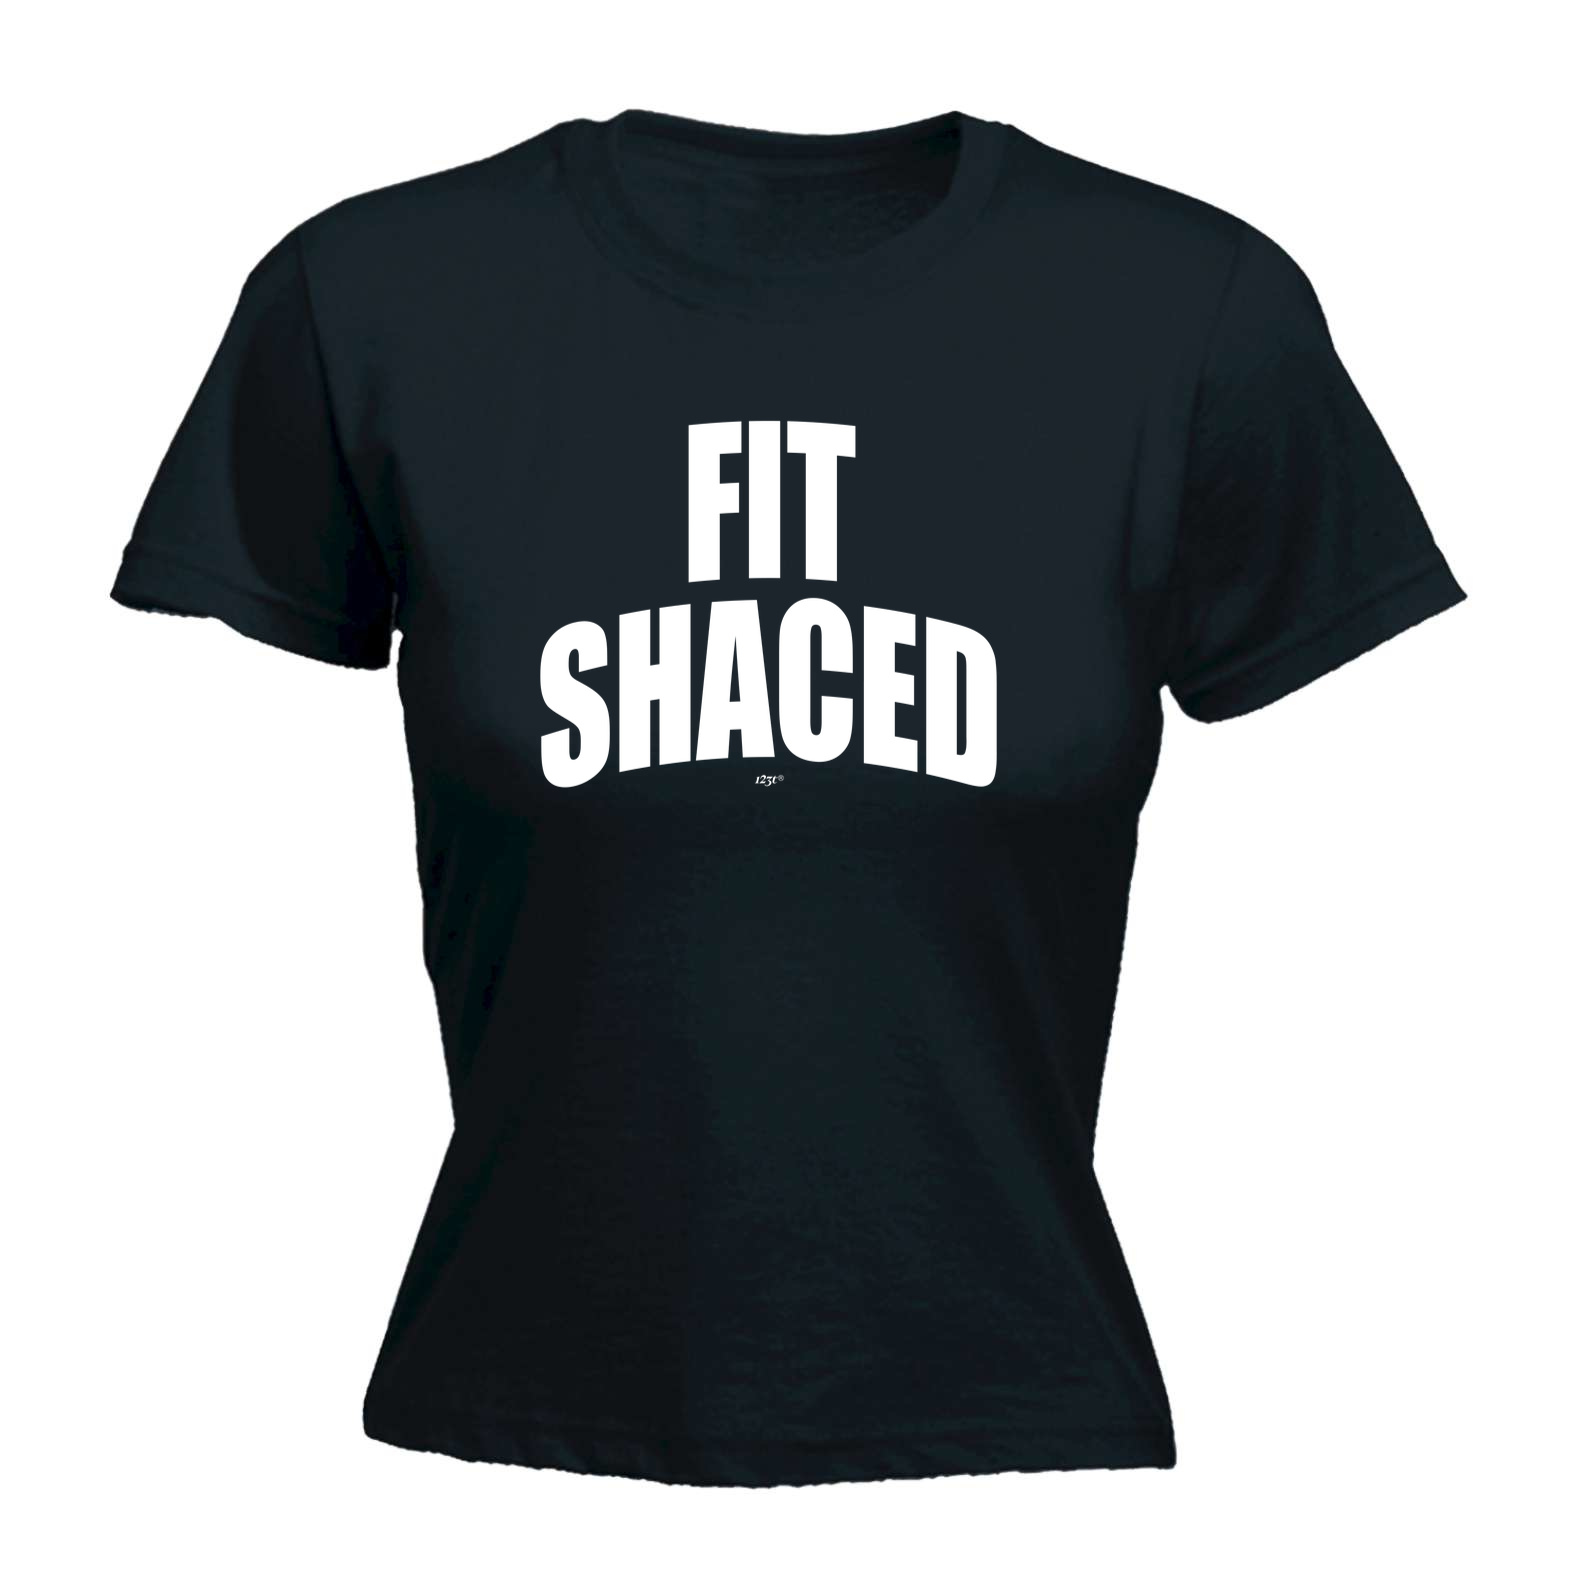 Fit Shaced Funny Novelty Tops T-Shirt Womens tee TShirt 